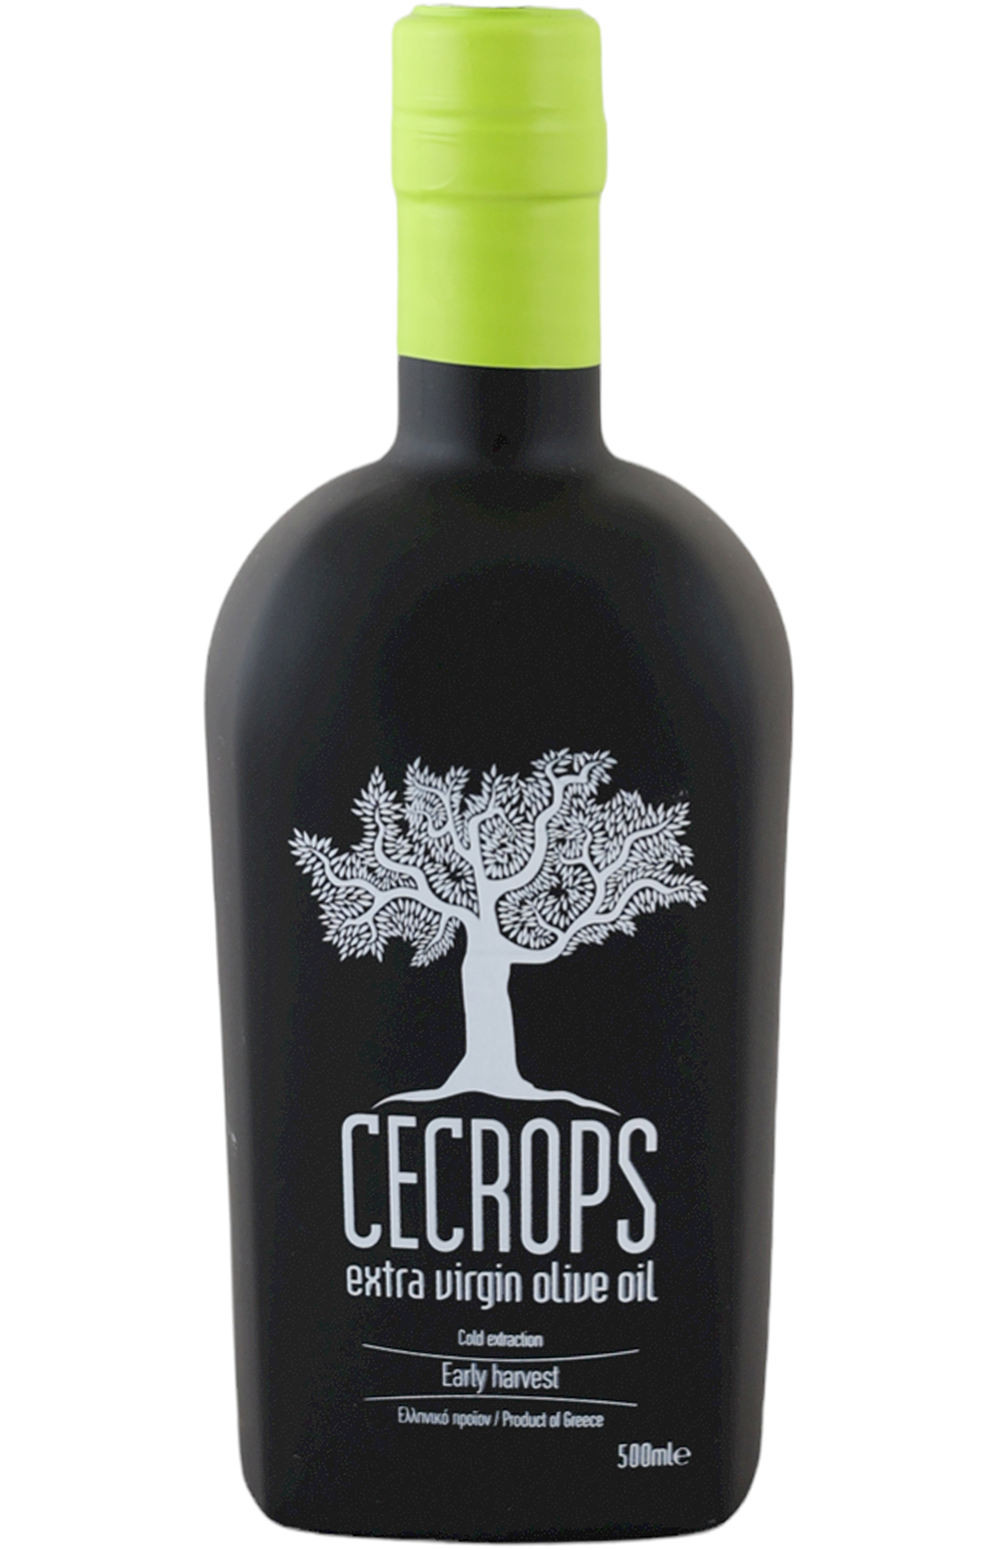 Cecrops Early Harvest Extra Virgin Olive Oil